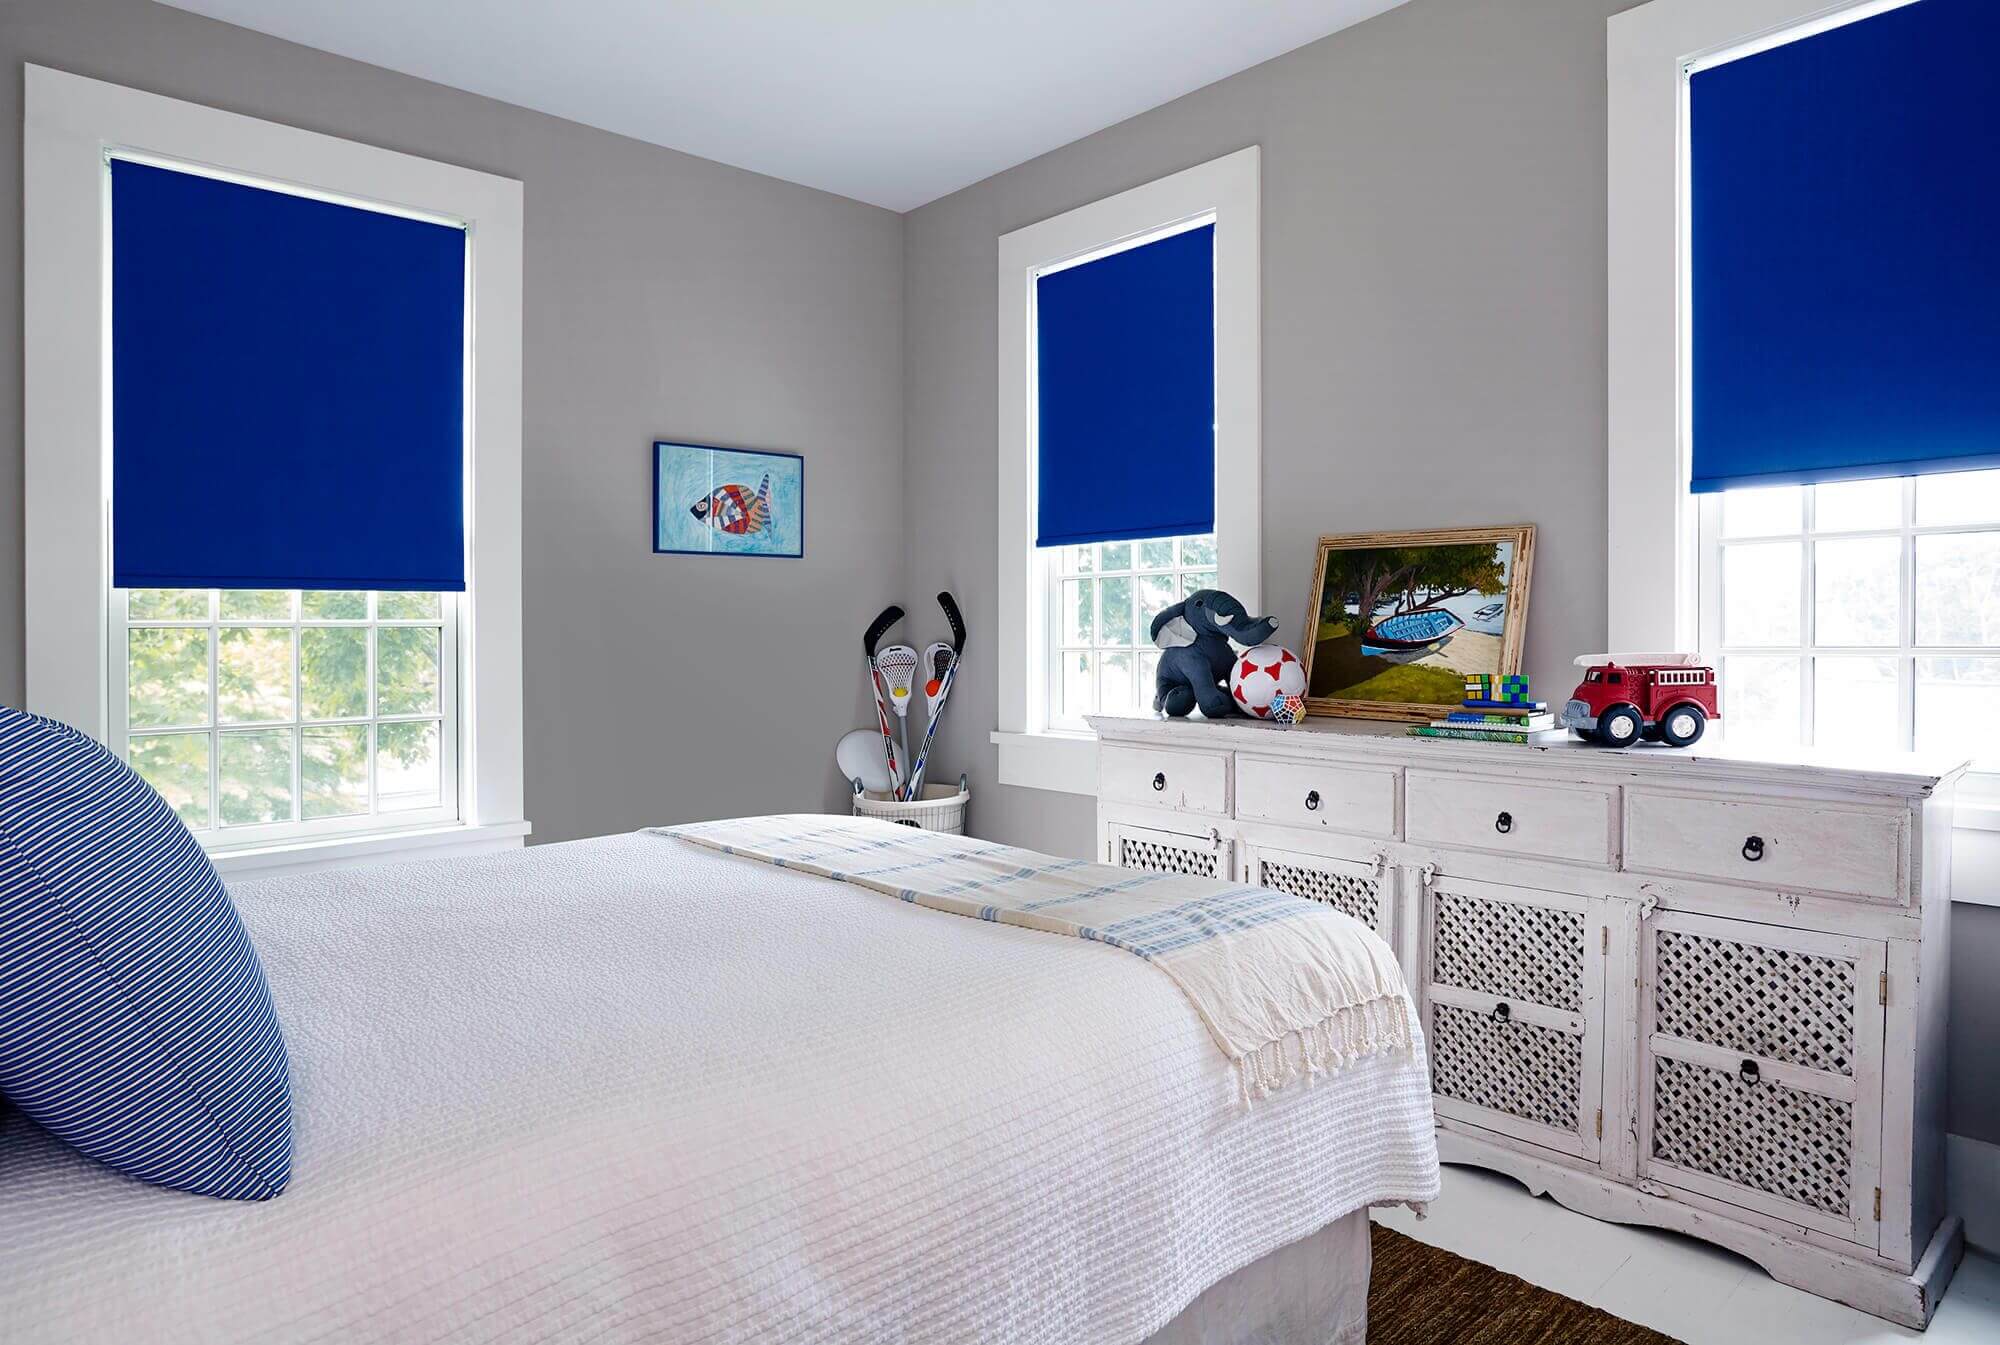 A bedroom with roller shades halfway down blocks out a lot of light in a child's bedroom